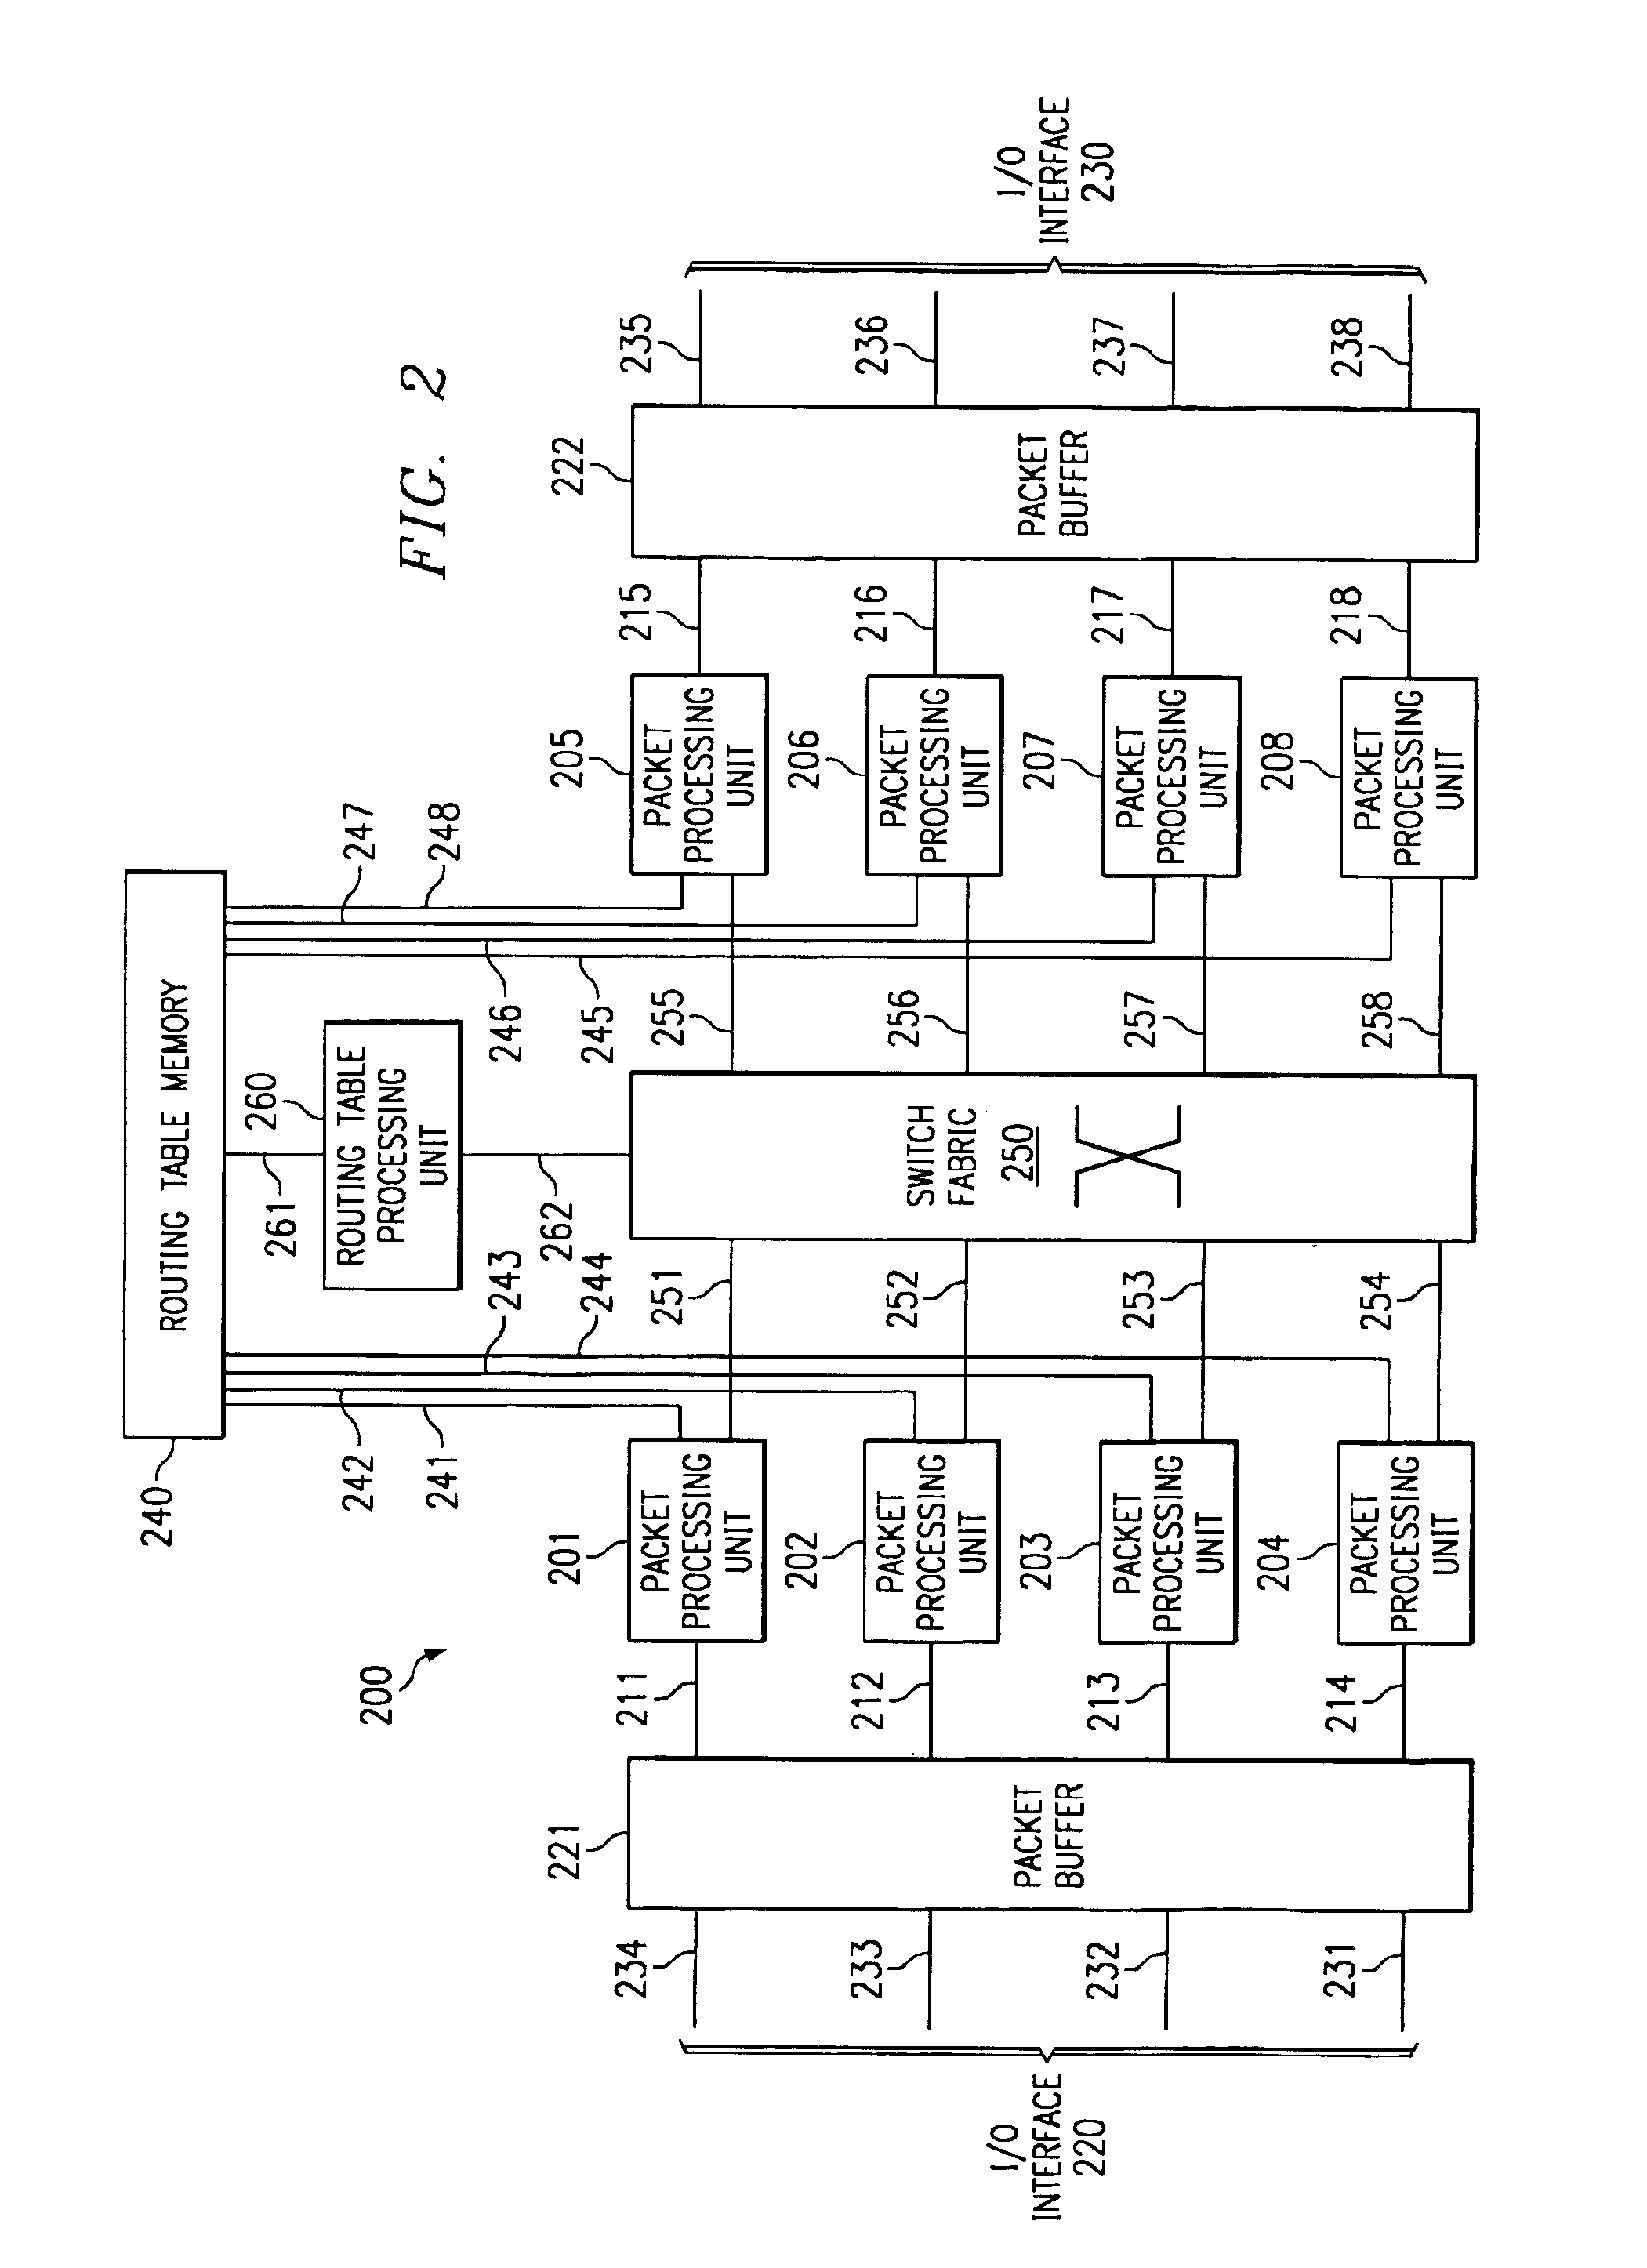 Method and apparatus for processing packets in a routing switch